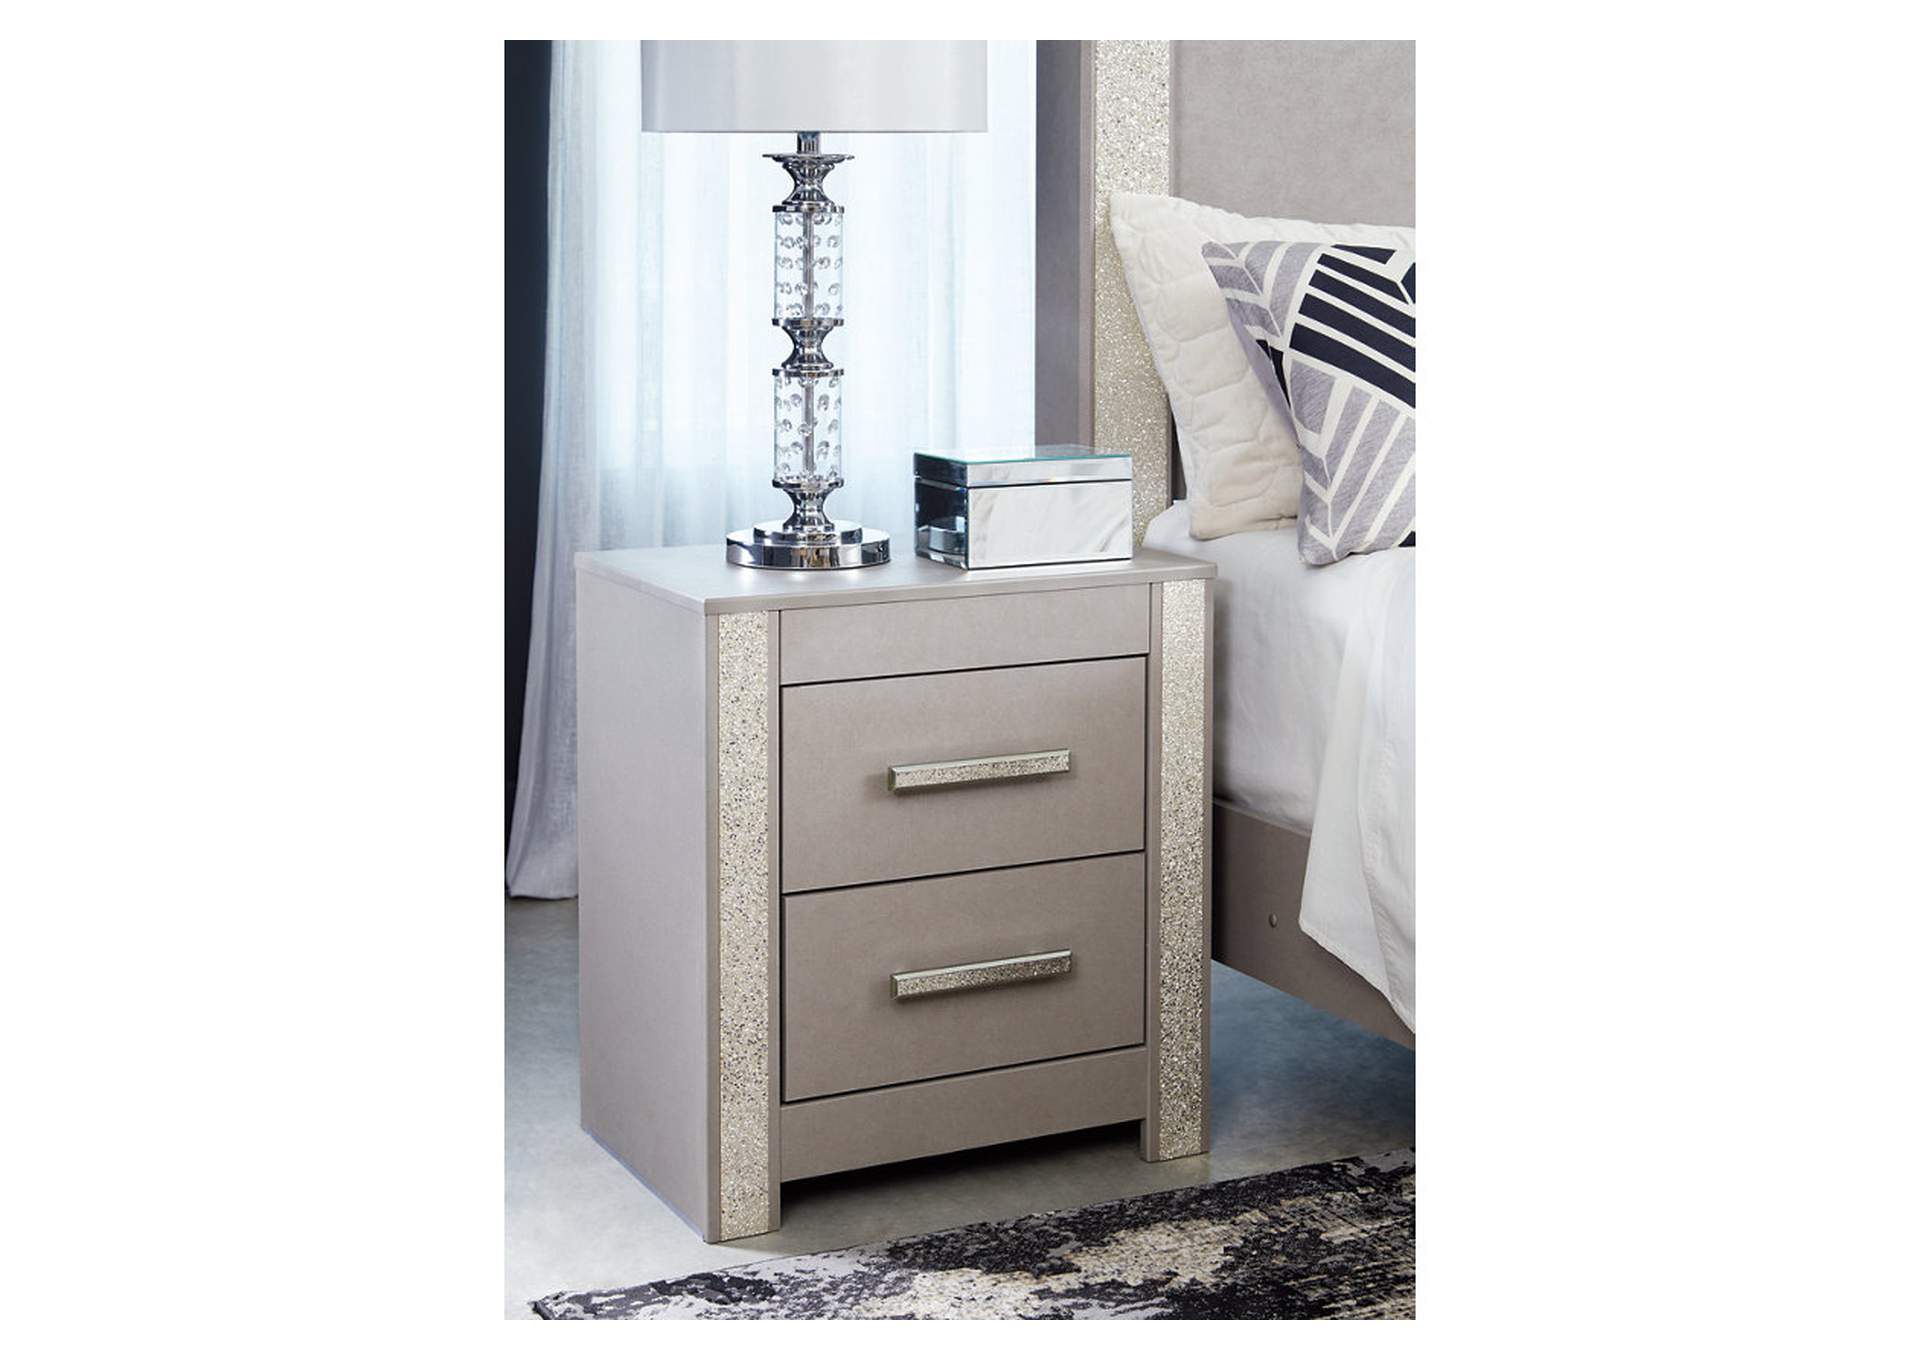 Surancha King Poster Bed with Mirrored Dresser, Chest and Nightstand,Signature Design By Ashley